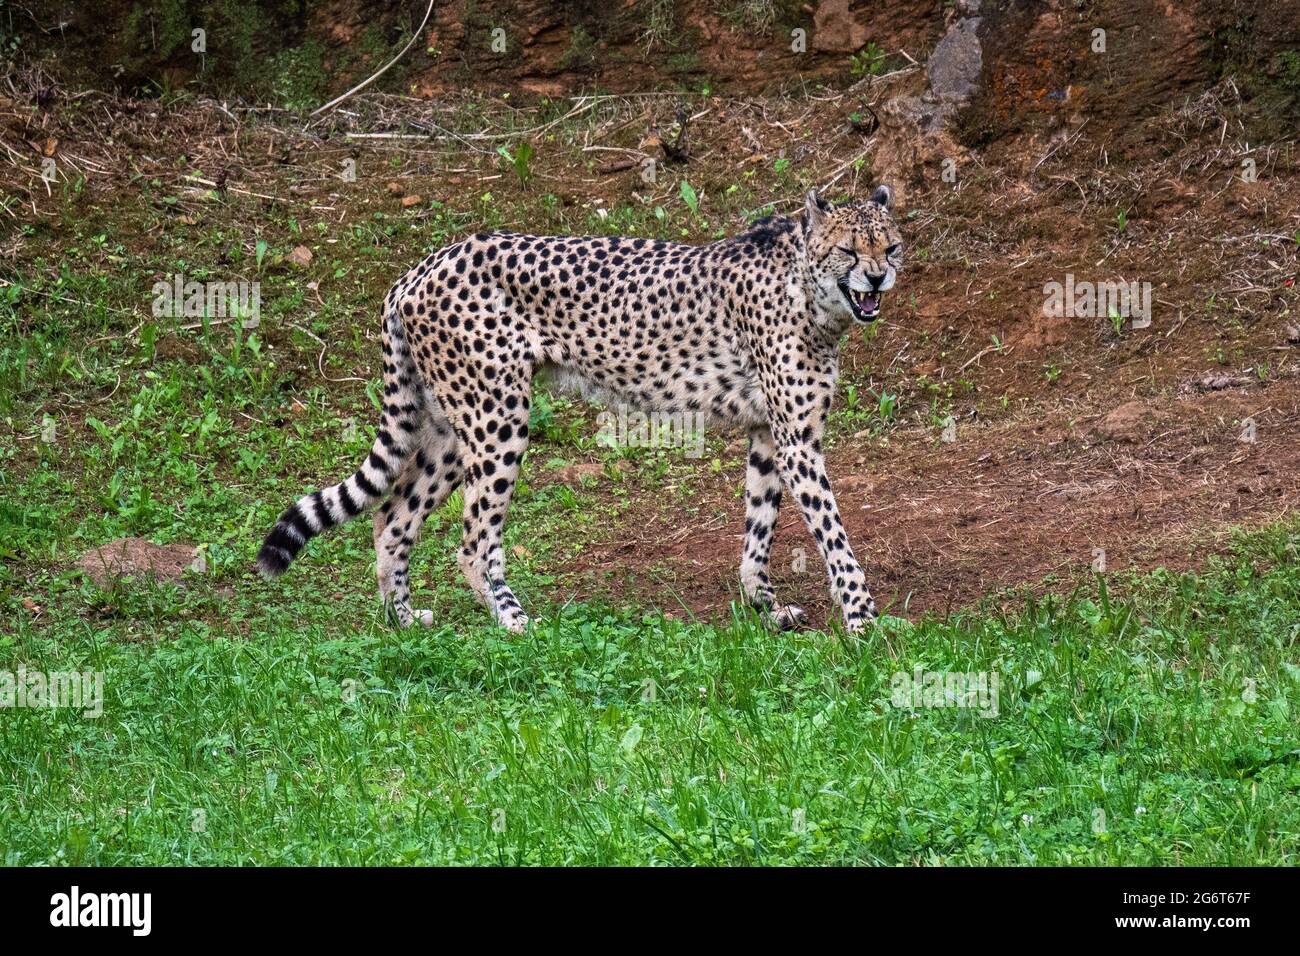 A cheetah (Acinonyx jubatus) in Cabarceno Nature Park. The Cabarceno Nature Park is not a conventional zoo. It is an area of 750 hectares that houses Stock Photo